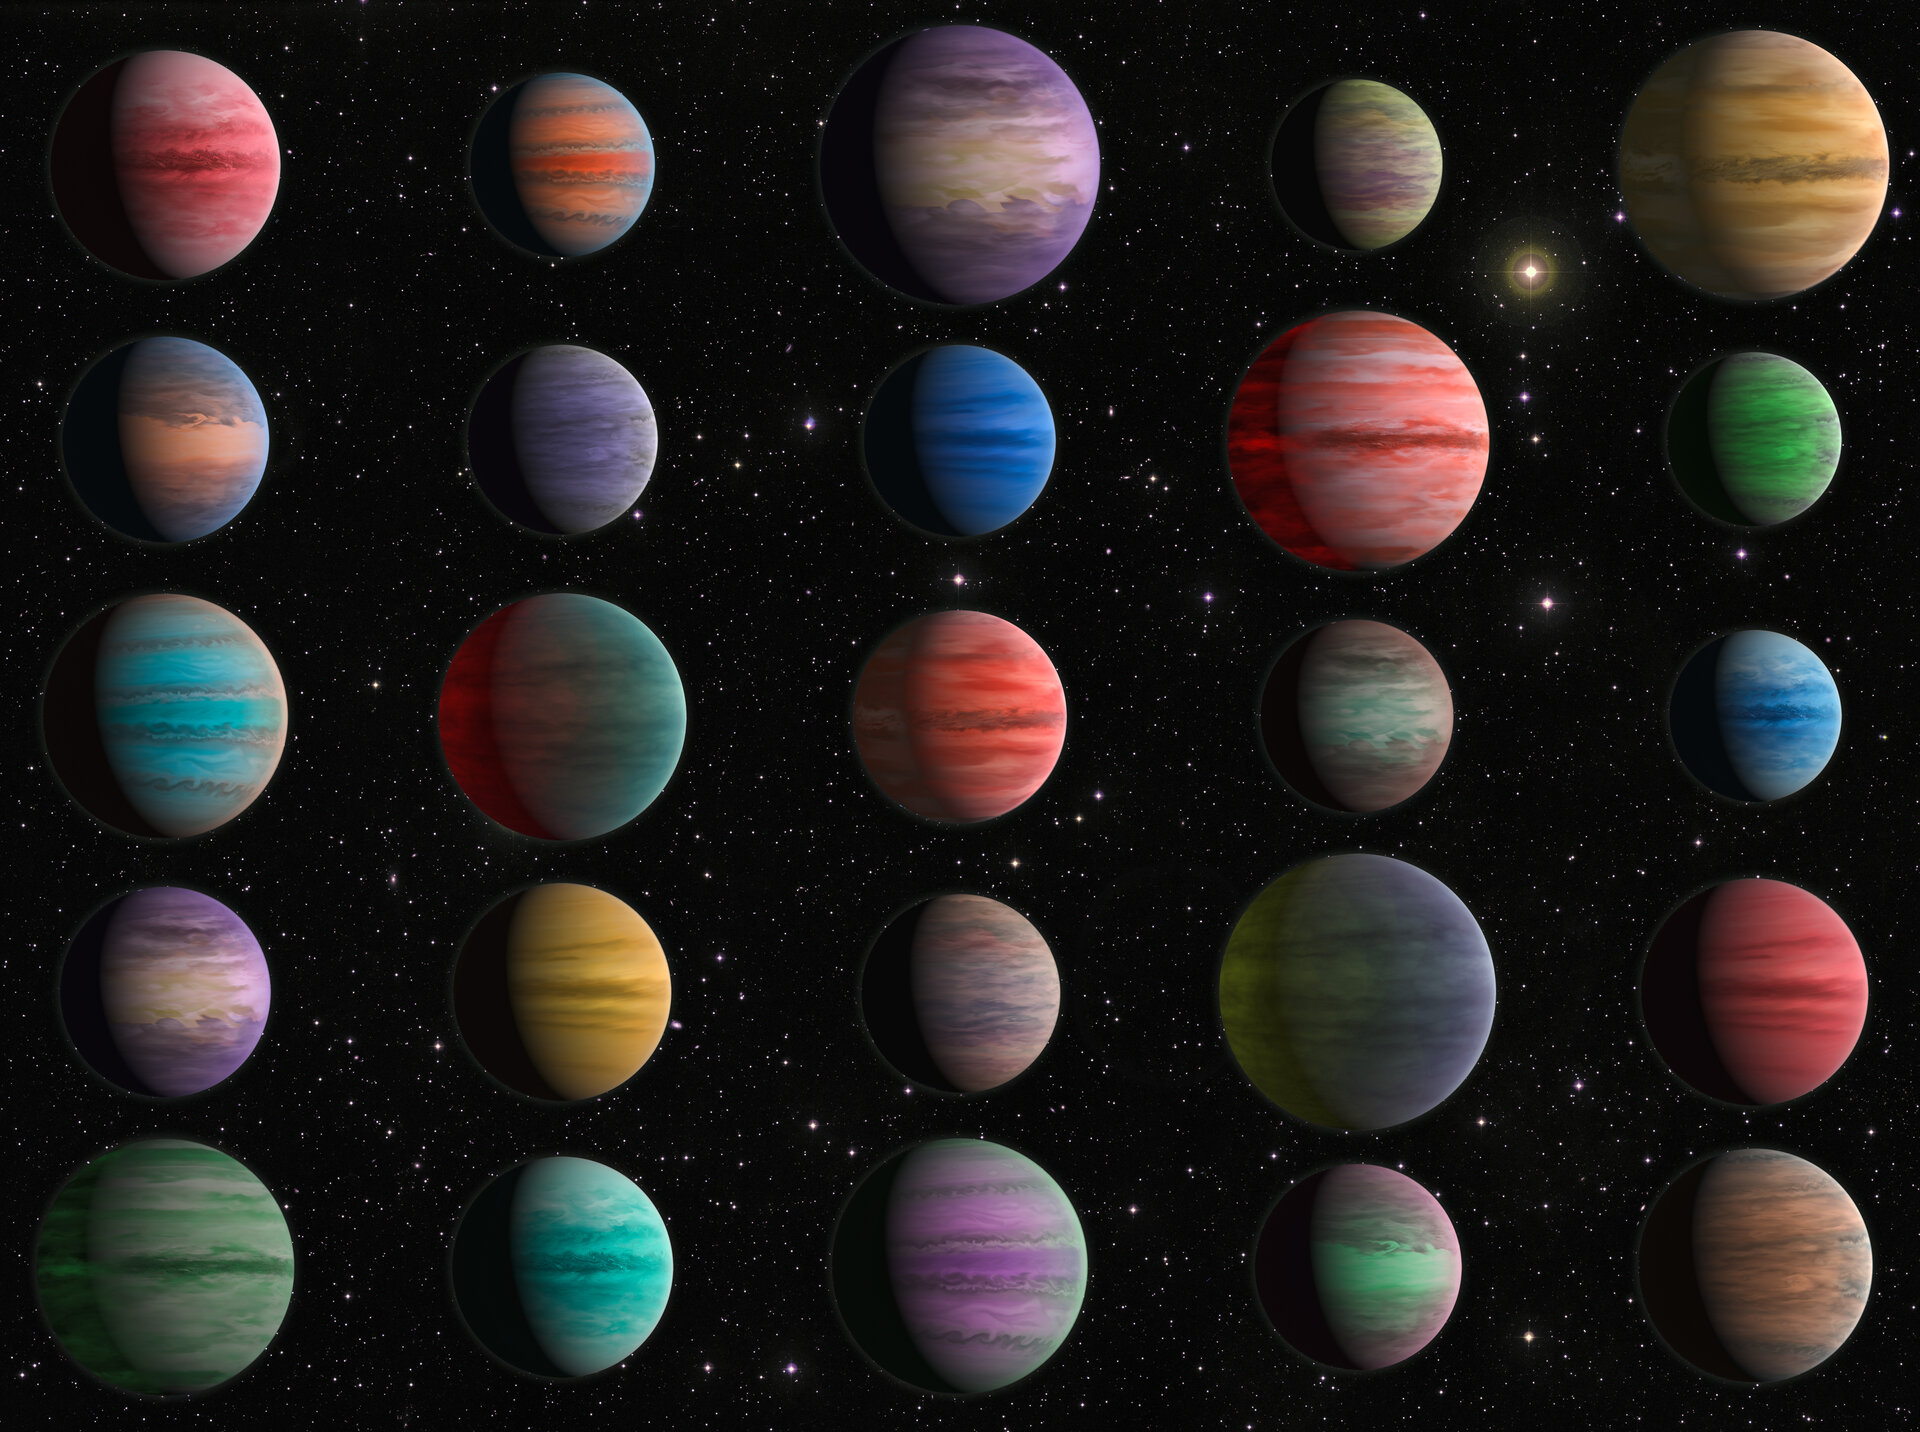 Hubble observations used to answer key exoplanet questions